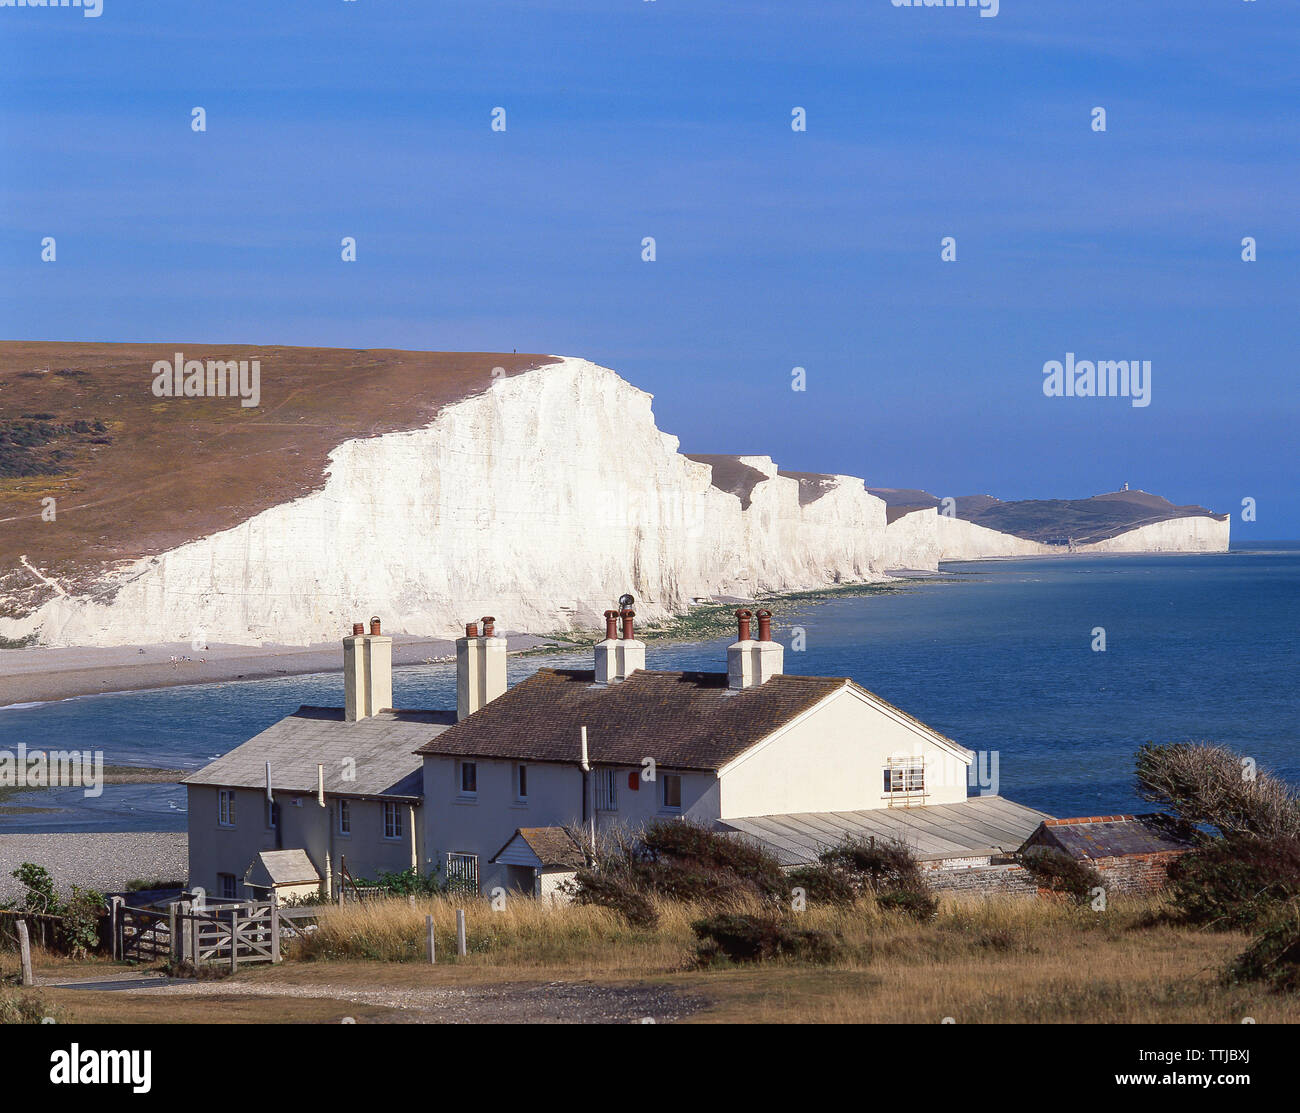 Seven Sisters Cliffs and Coastguard Cottages, Cuckmere Haven, Seaford Head Nature Reserve, Seaford, East Sussex, England, United Kingdom Stock Photo